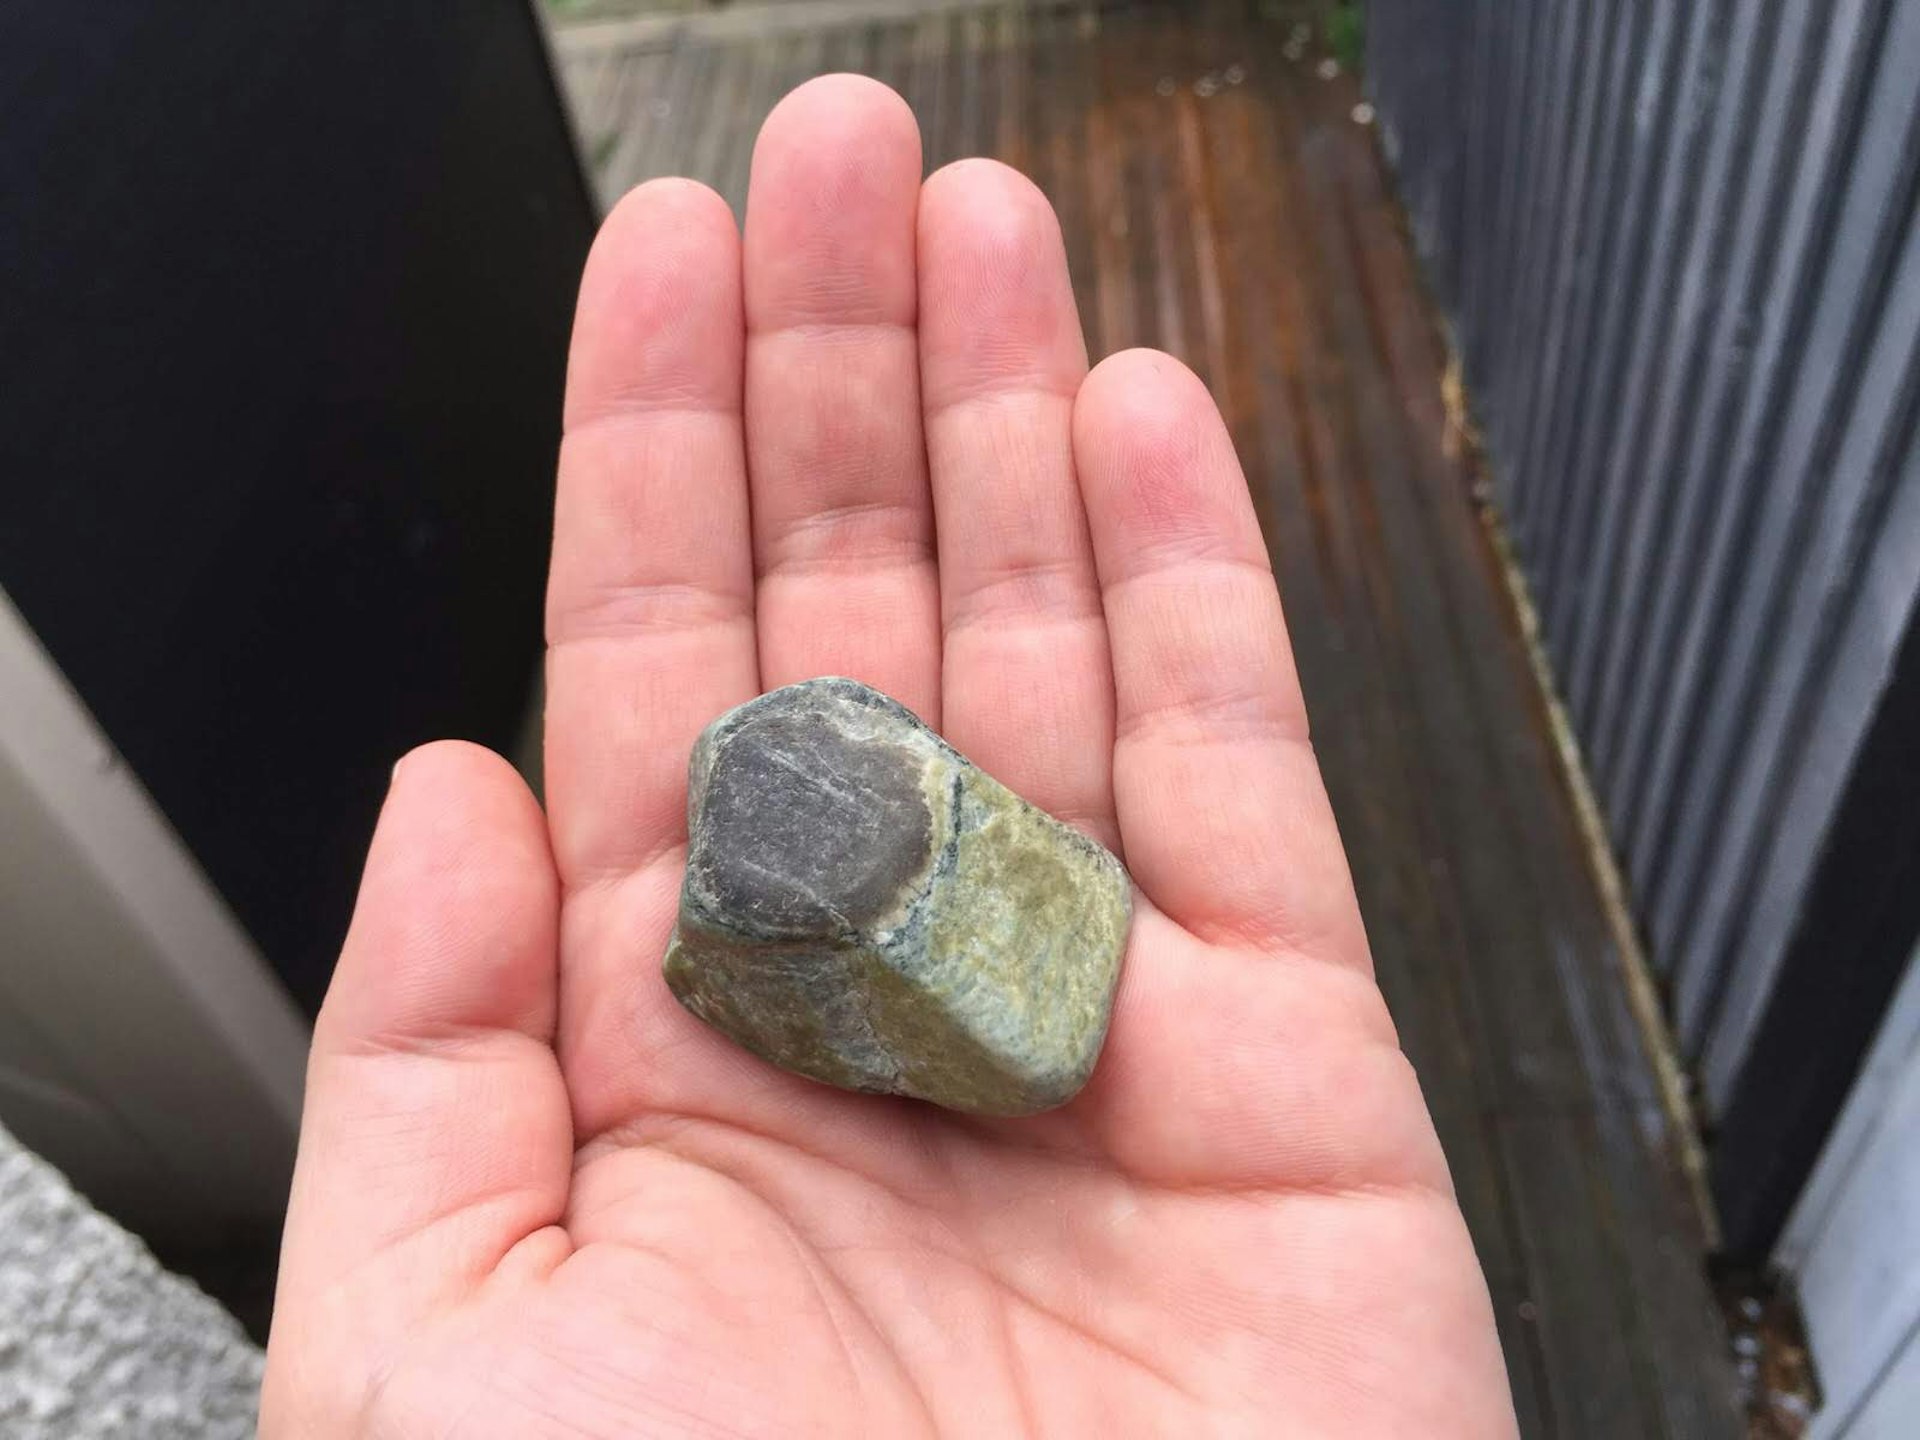 A small stone held in the palm of a hand